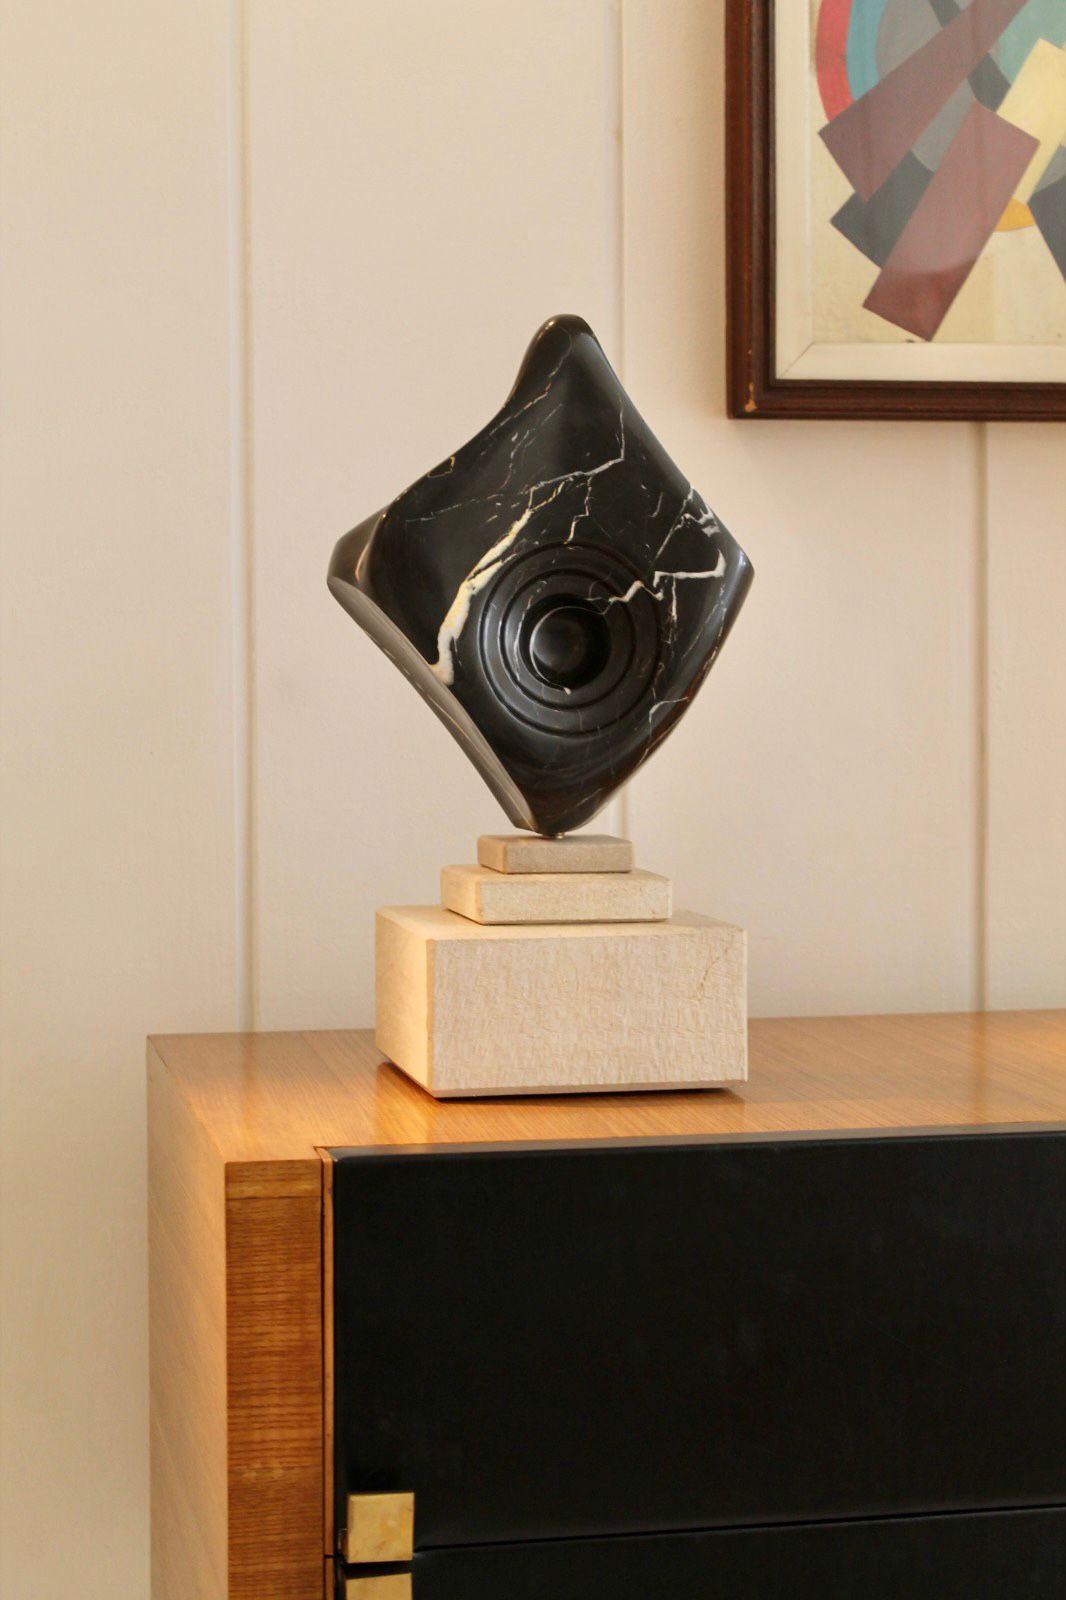 One of a kind black belgiam marble sculpture with travertine base
Sculpture rotates 360 degrees 
handmade work signed by the french artist Jean Frederique Bourdier
Perfect condition.